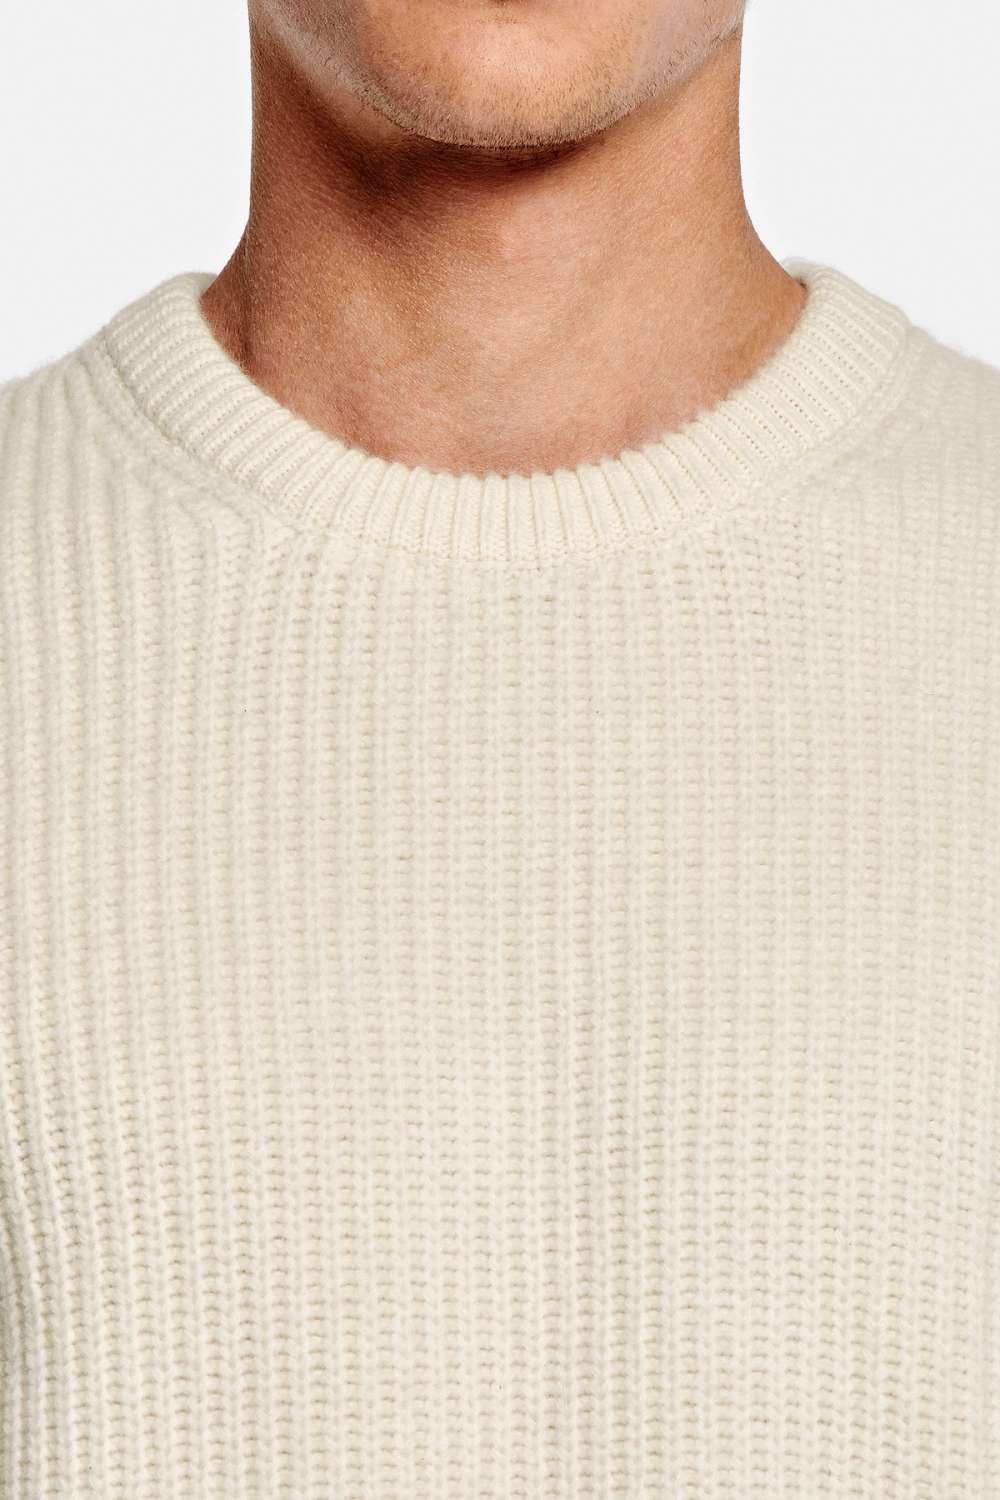 Coconuts * The Knit Pullover